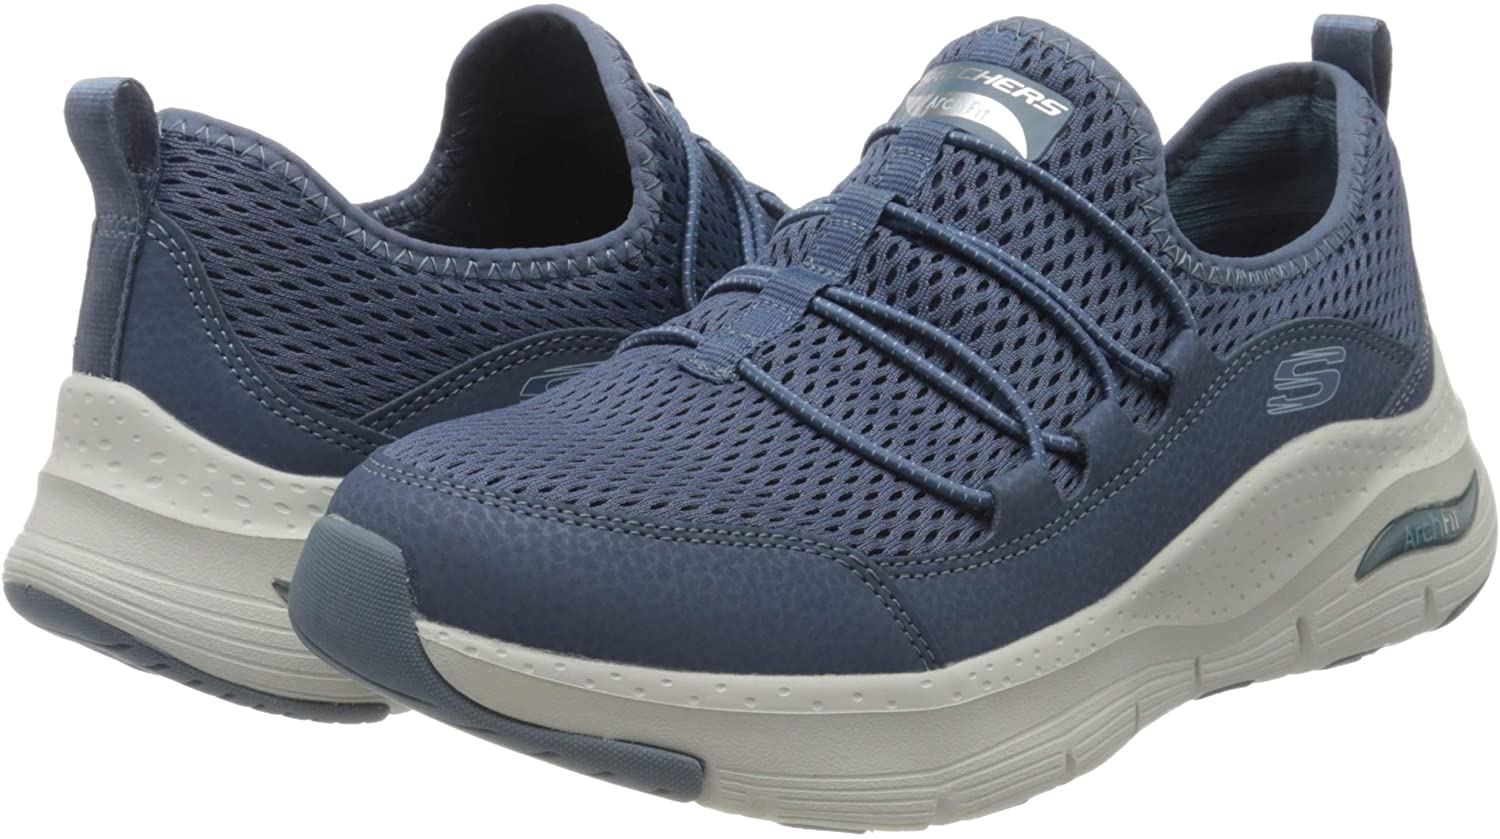 30 Minute Best Skechers Workout Shoes with Comfort Workout Clothes